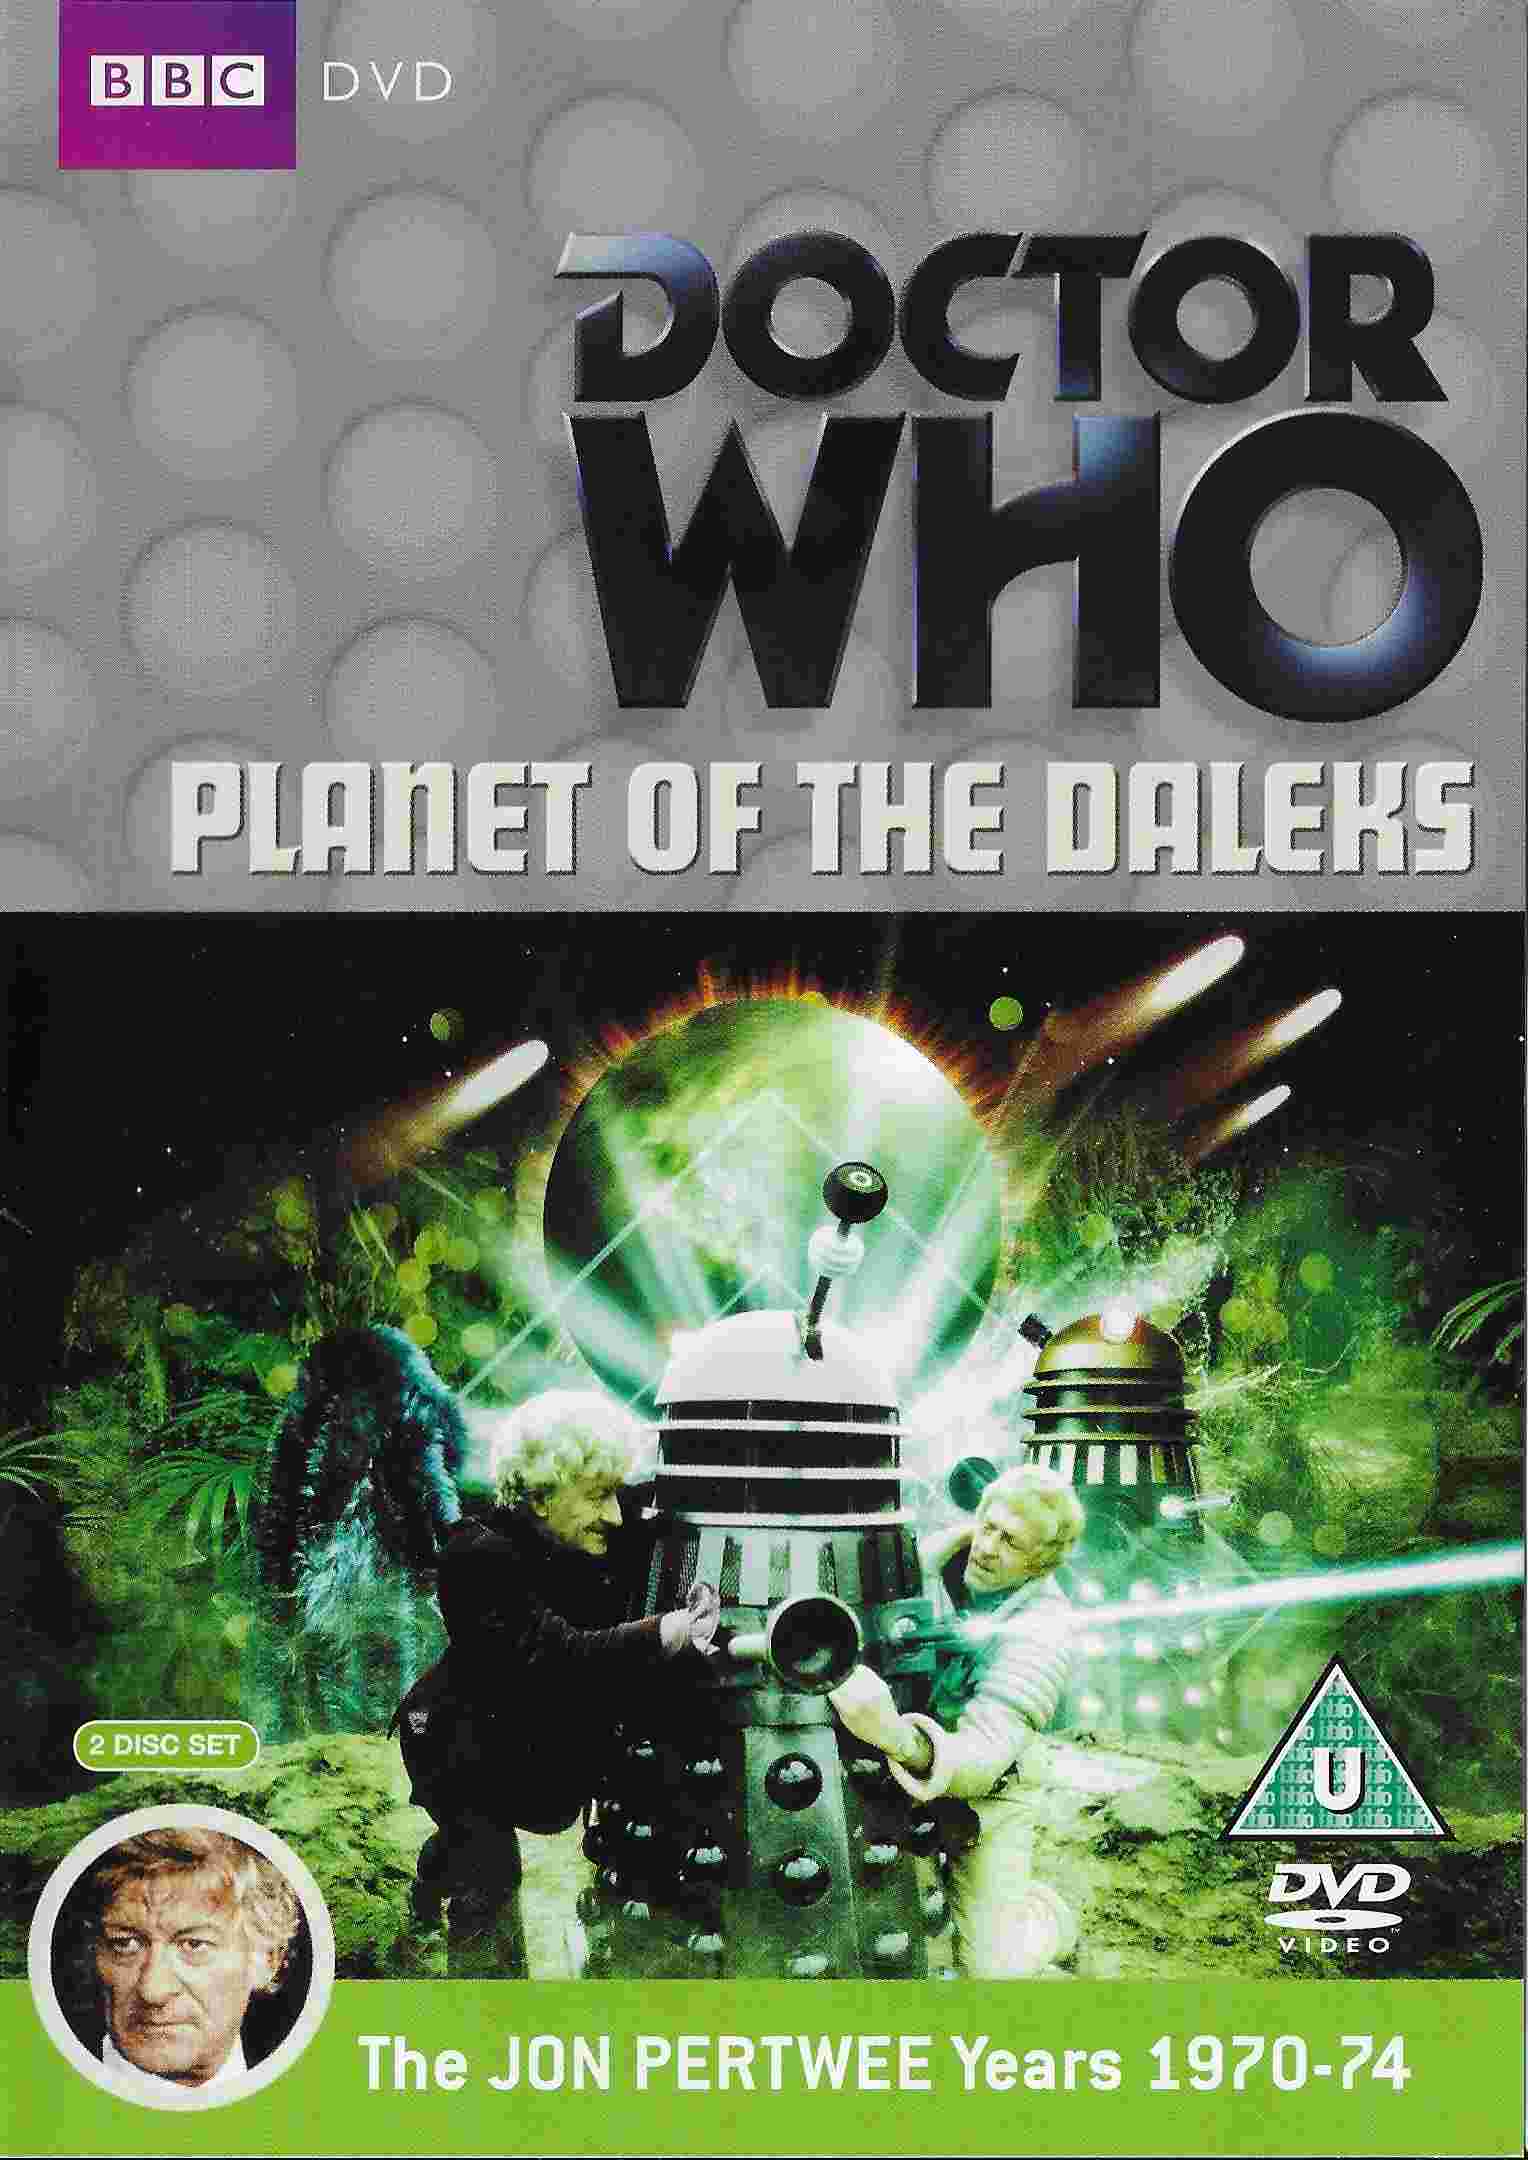 Picture of BBCDVD 2614B Doctor Who - Planet of the Daleks by artist Terry Nation from the BBC records and Tapes library